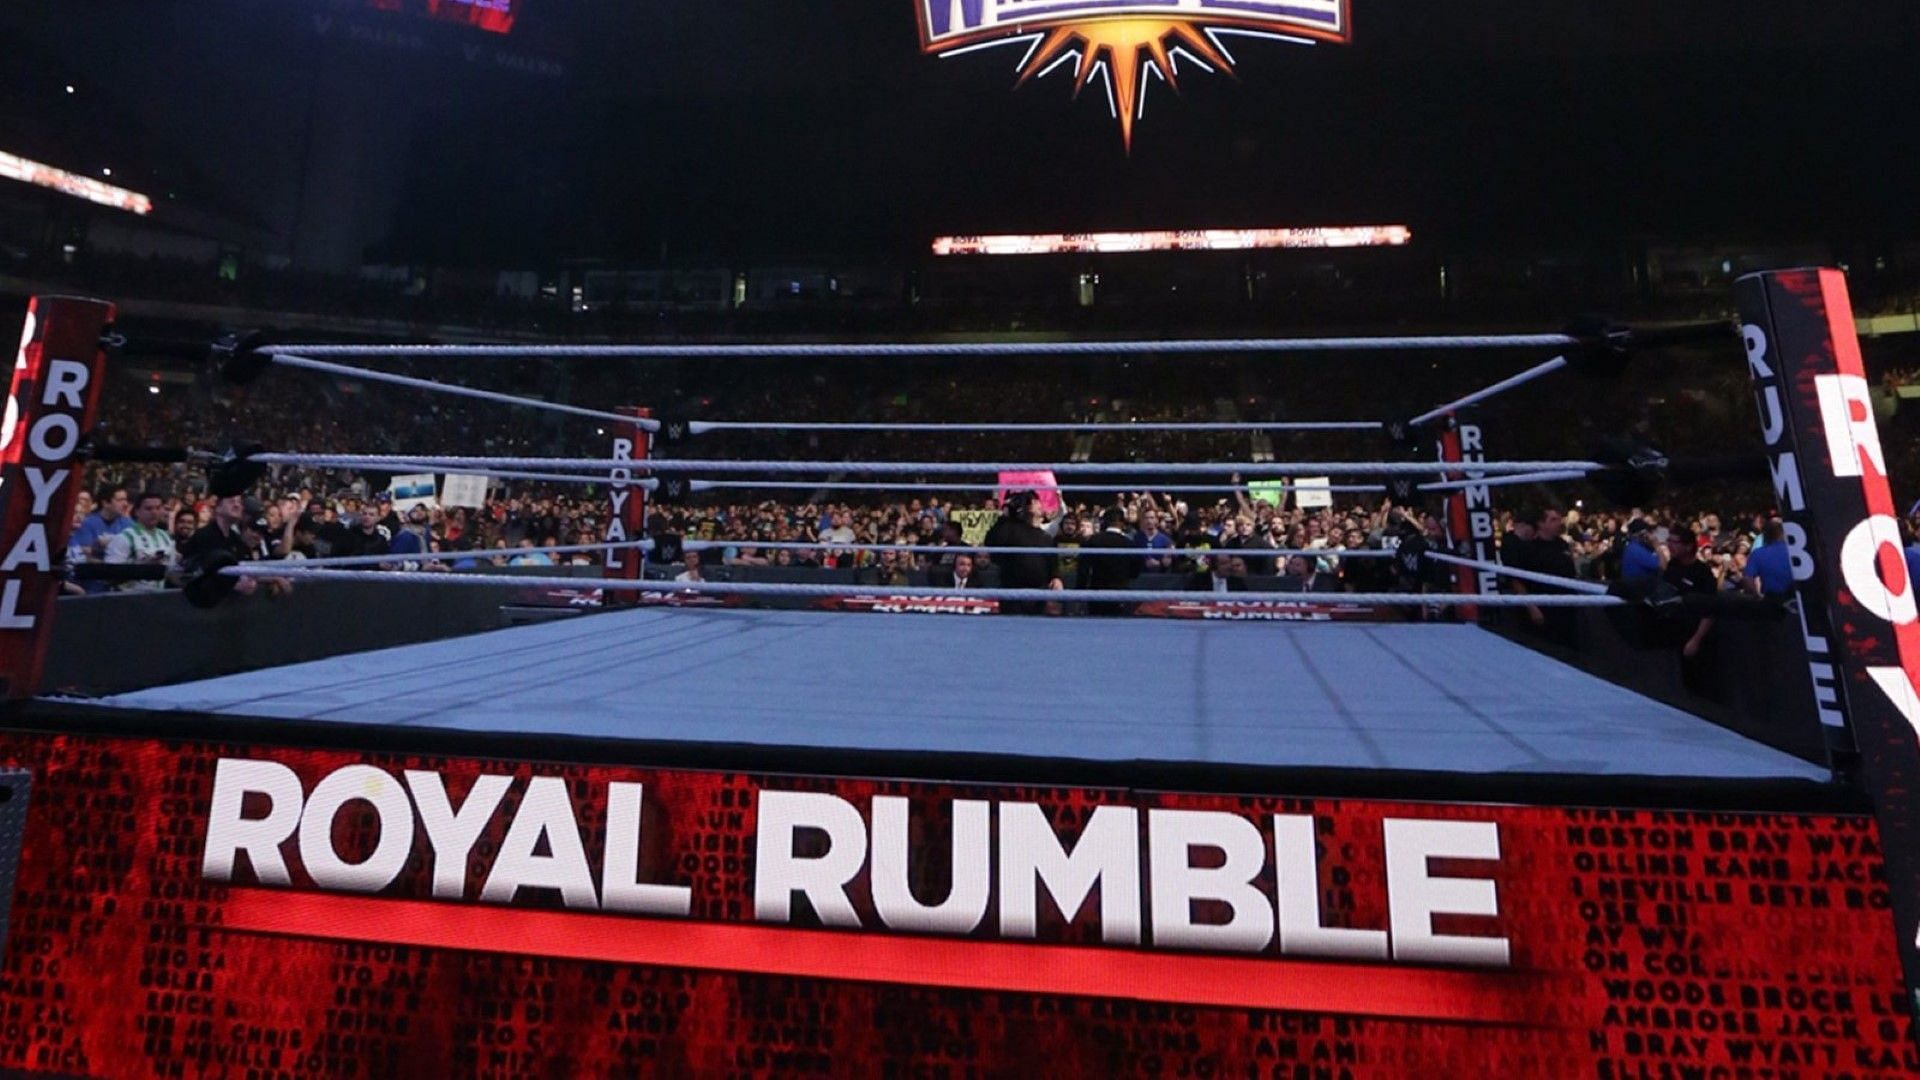 The WWE ring set up for the Royal Rumble Match